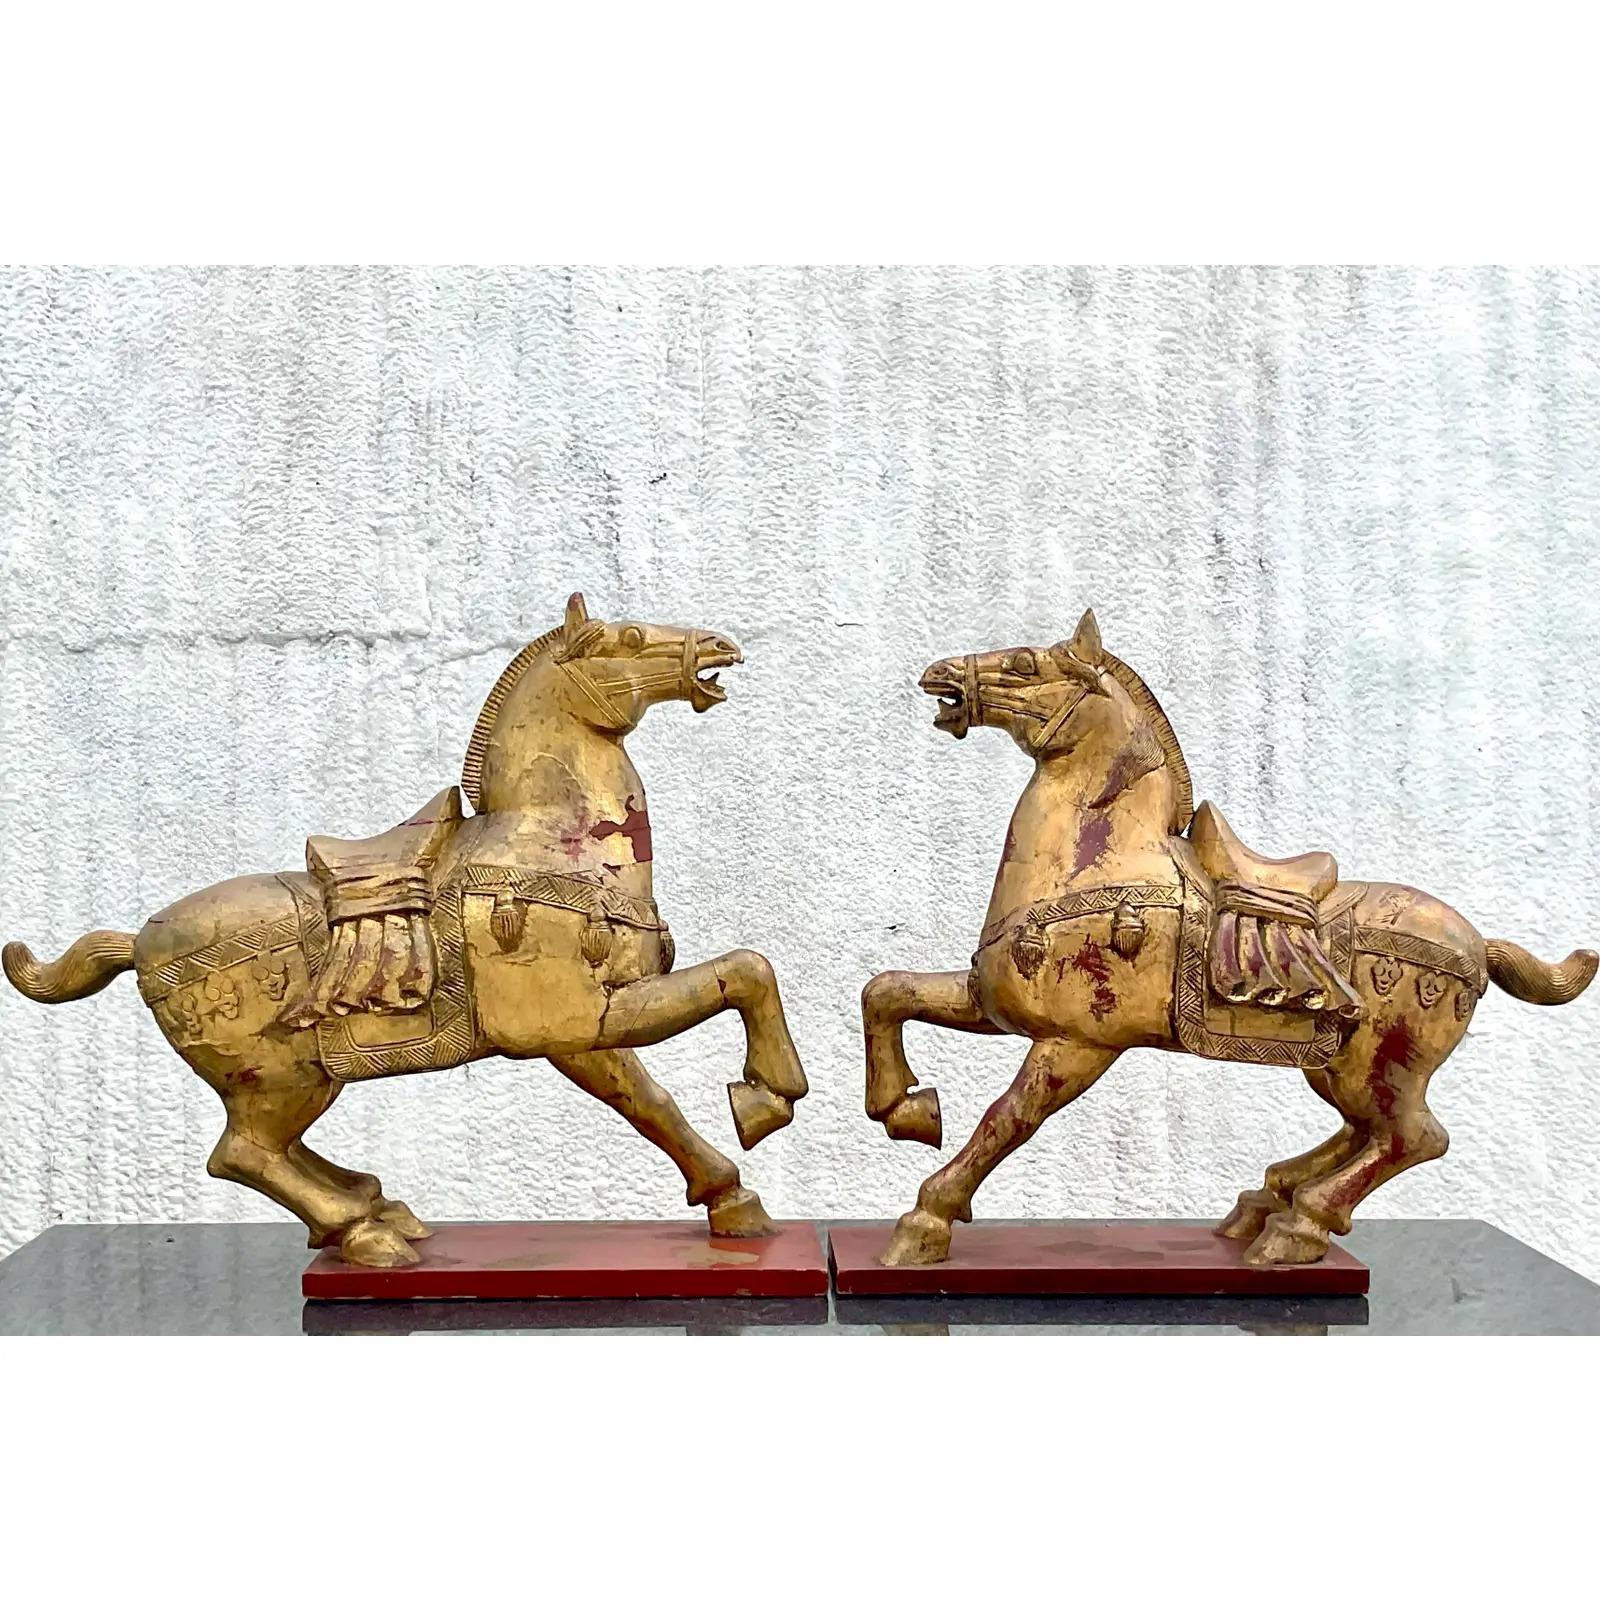 20th Century Vintage Asian Gilt Carved Wooden Emperor Horses - a Pair For Sale